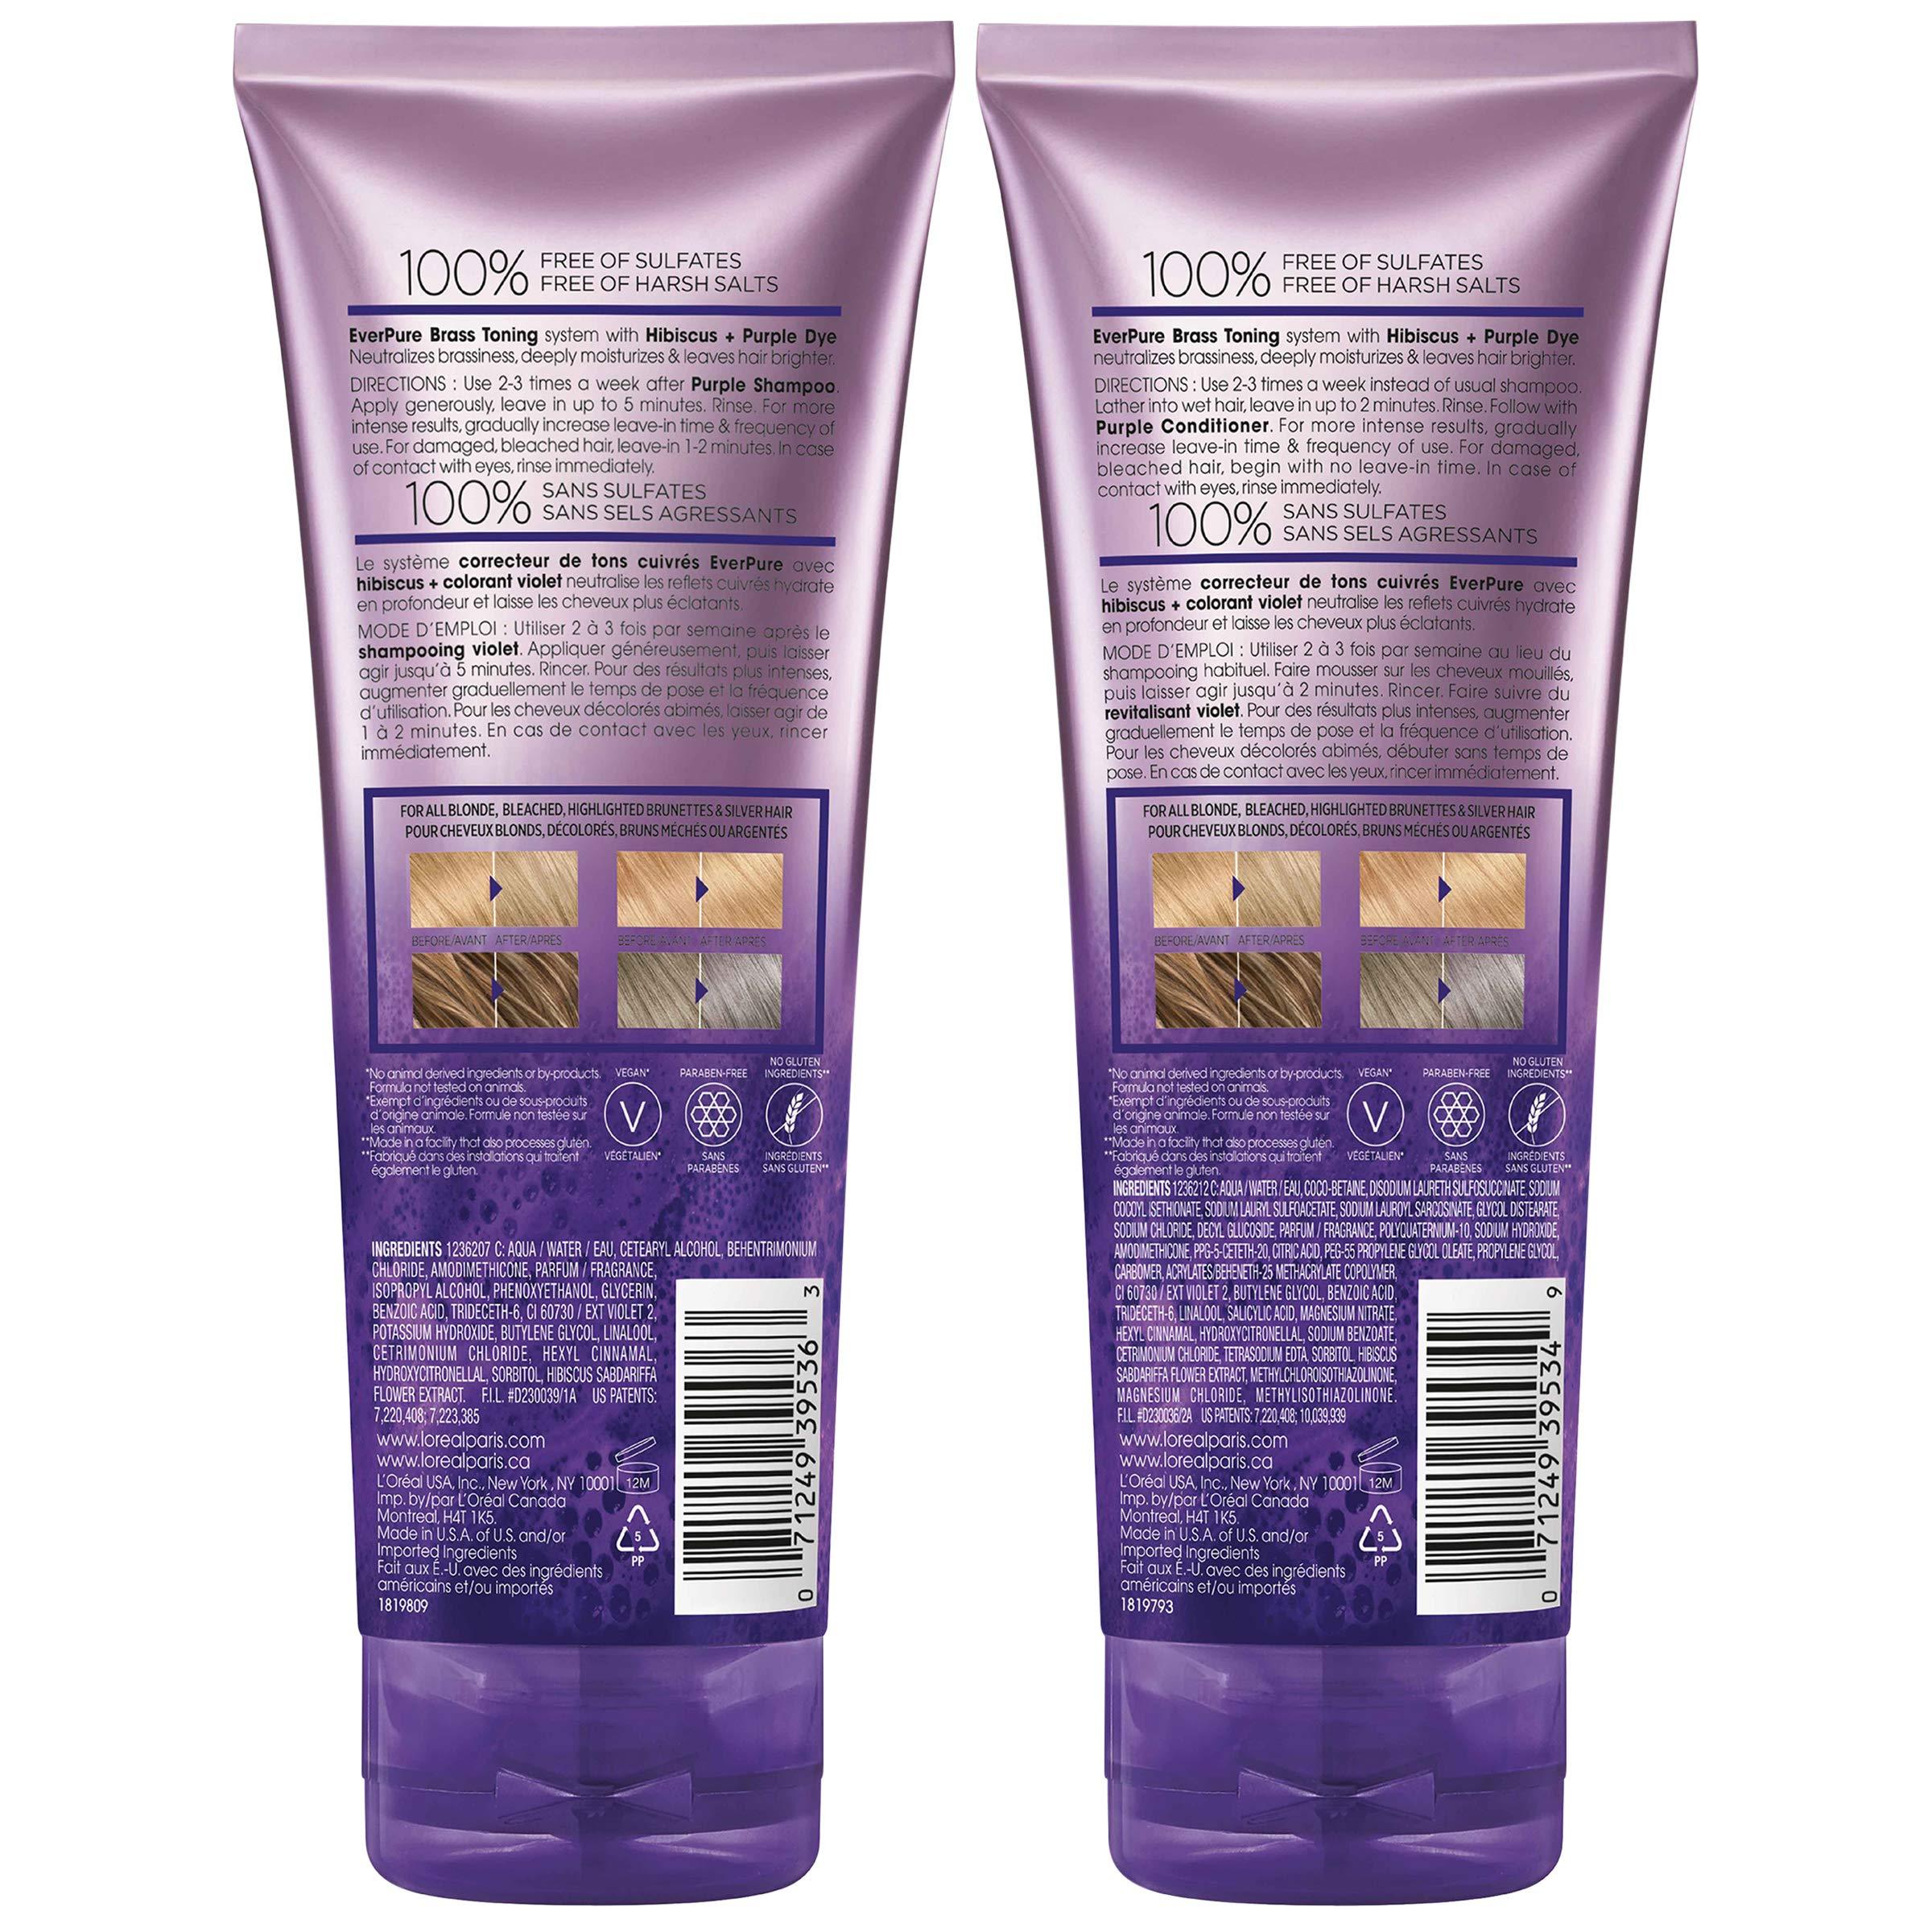 L'Oreal Paris EverPure Color Protection Purple Shampoo & Conditioner Full Size Set with Hibiscus - 2 Piece - image 4 of 6